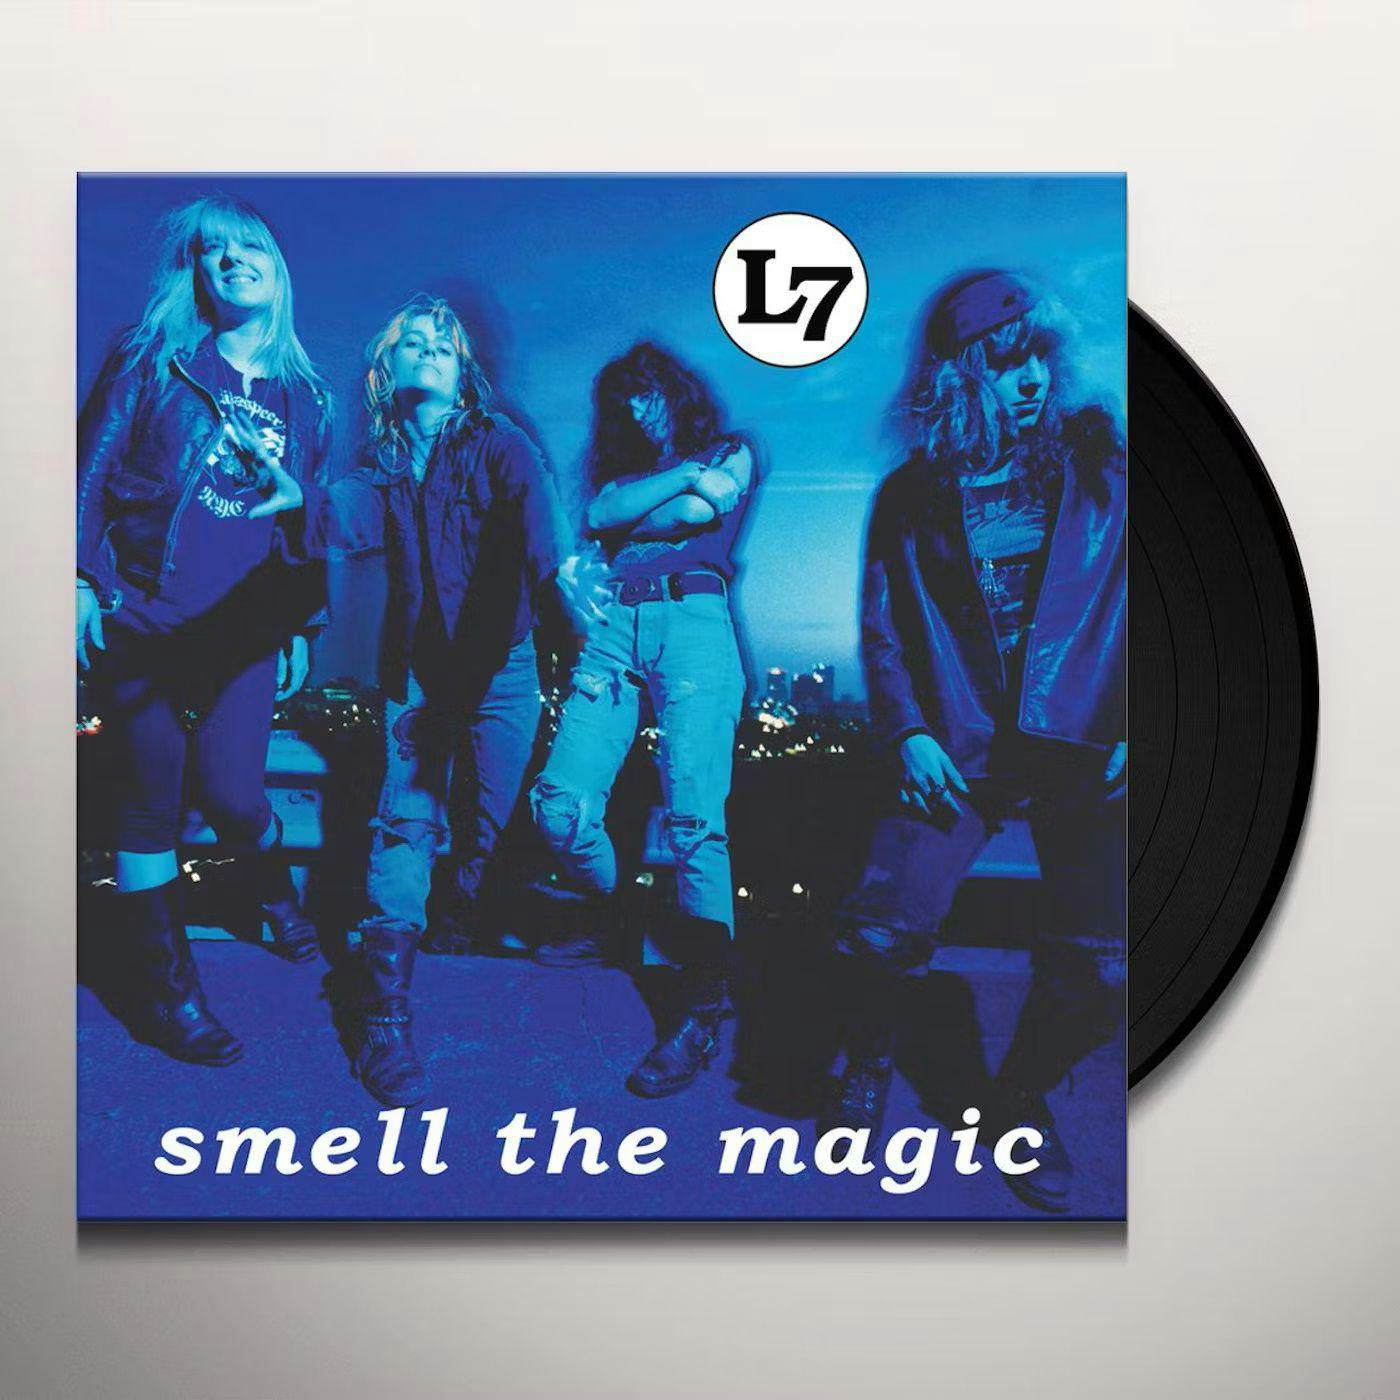 L7 SMELL THE MAGIC (REMASTERED) Vinyl Record